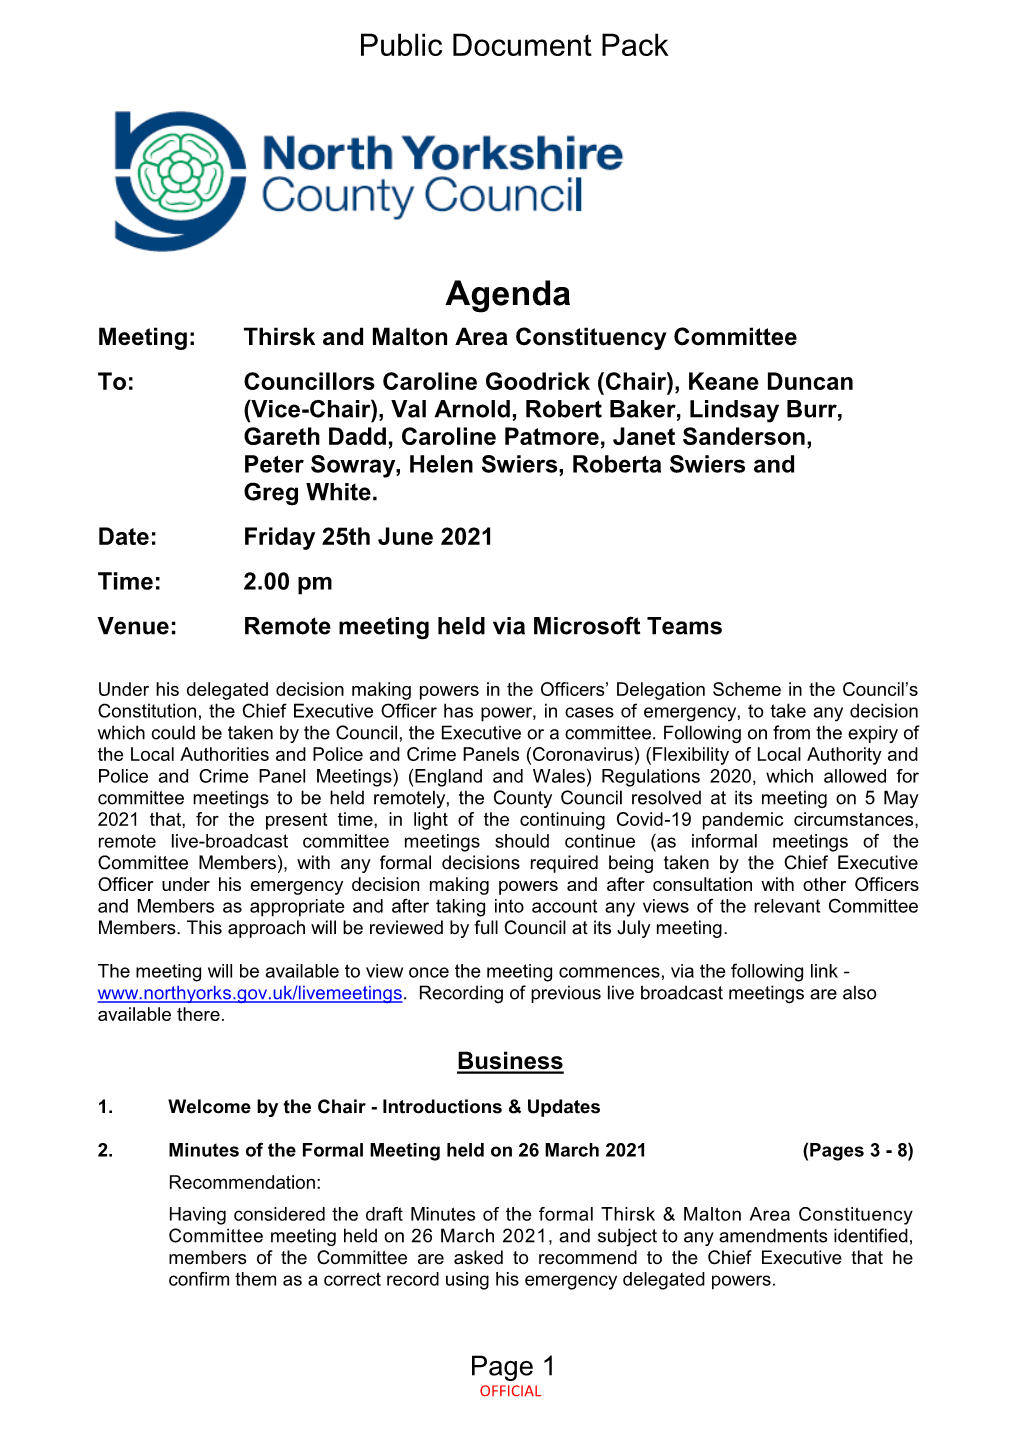 (Public Pack)Agenda Document for Thirsk and Malton Area Constituency Committee, 25/06/2021 14:00